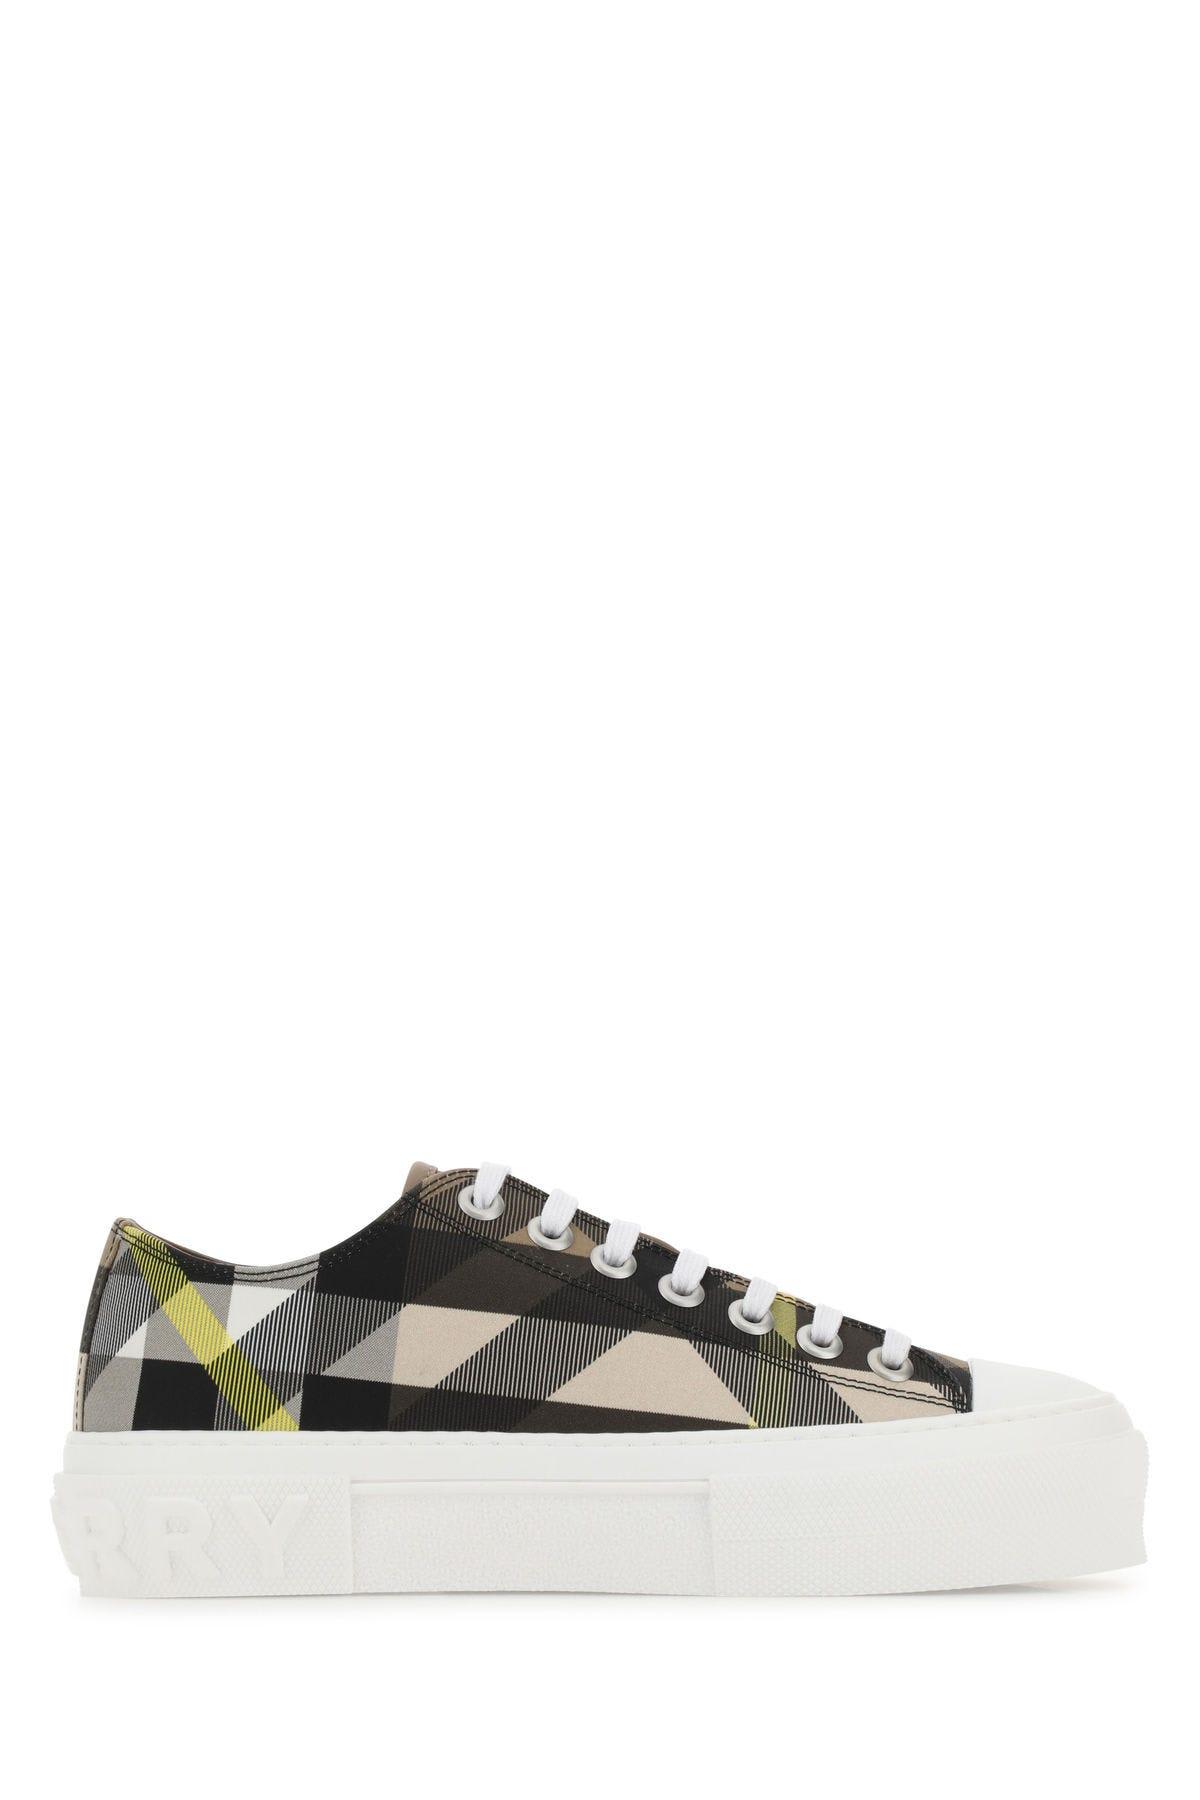 Burberry Embroidered Fabric Sneakers